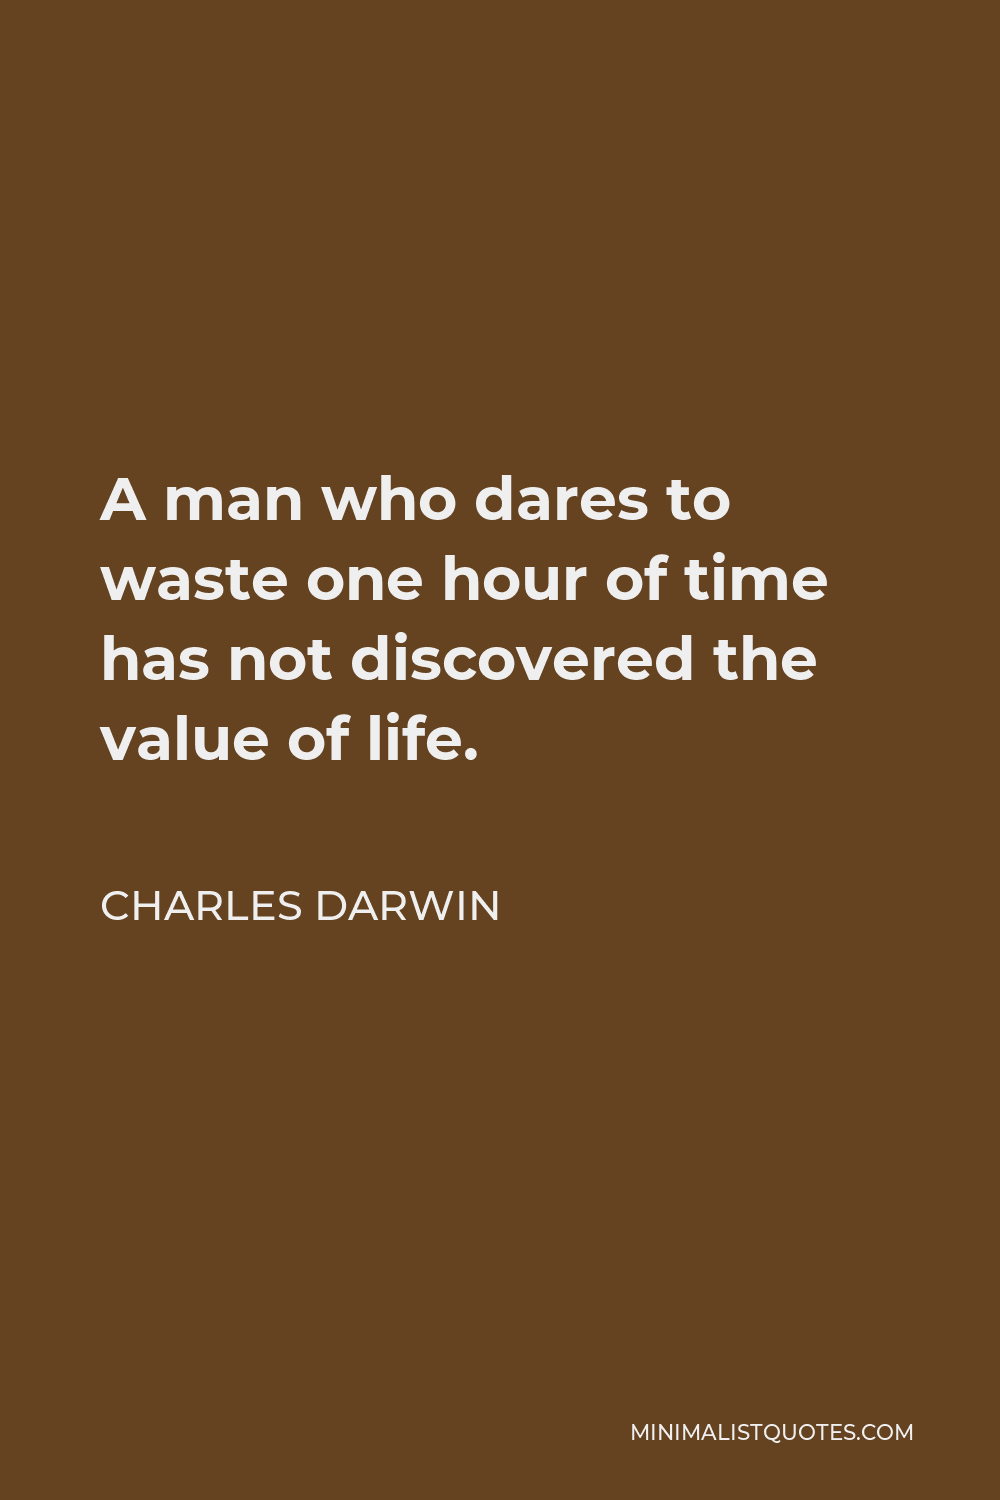 Charles Darwin Quote - A man who dares to waste one hour of time has not discovered the value of life.